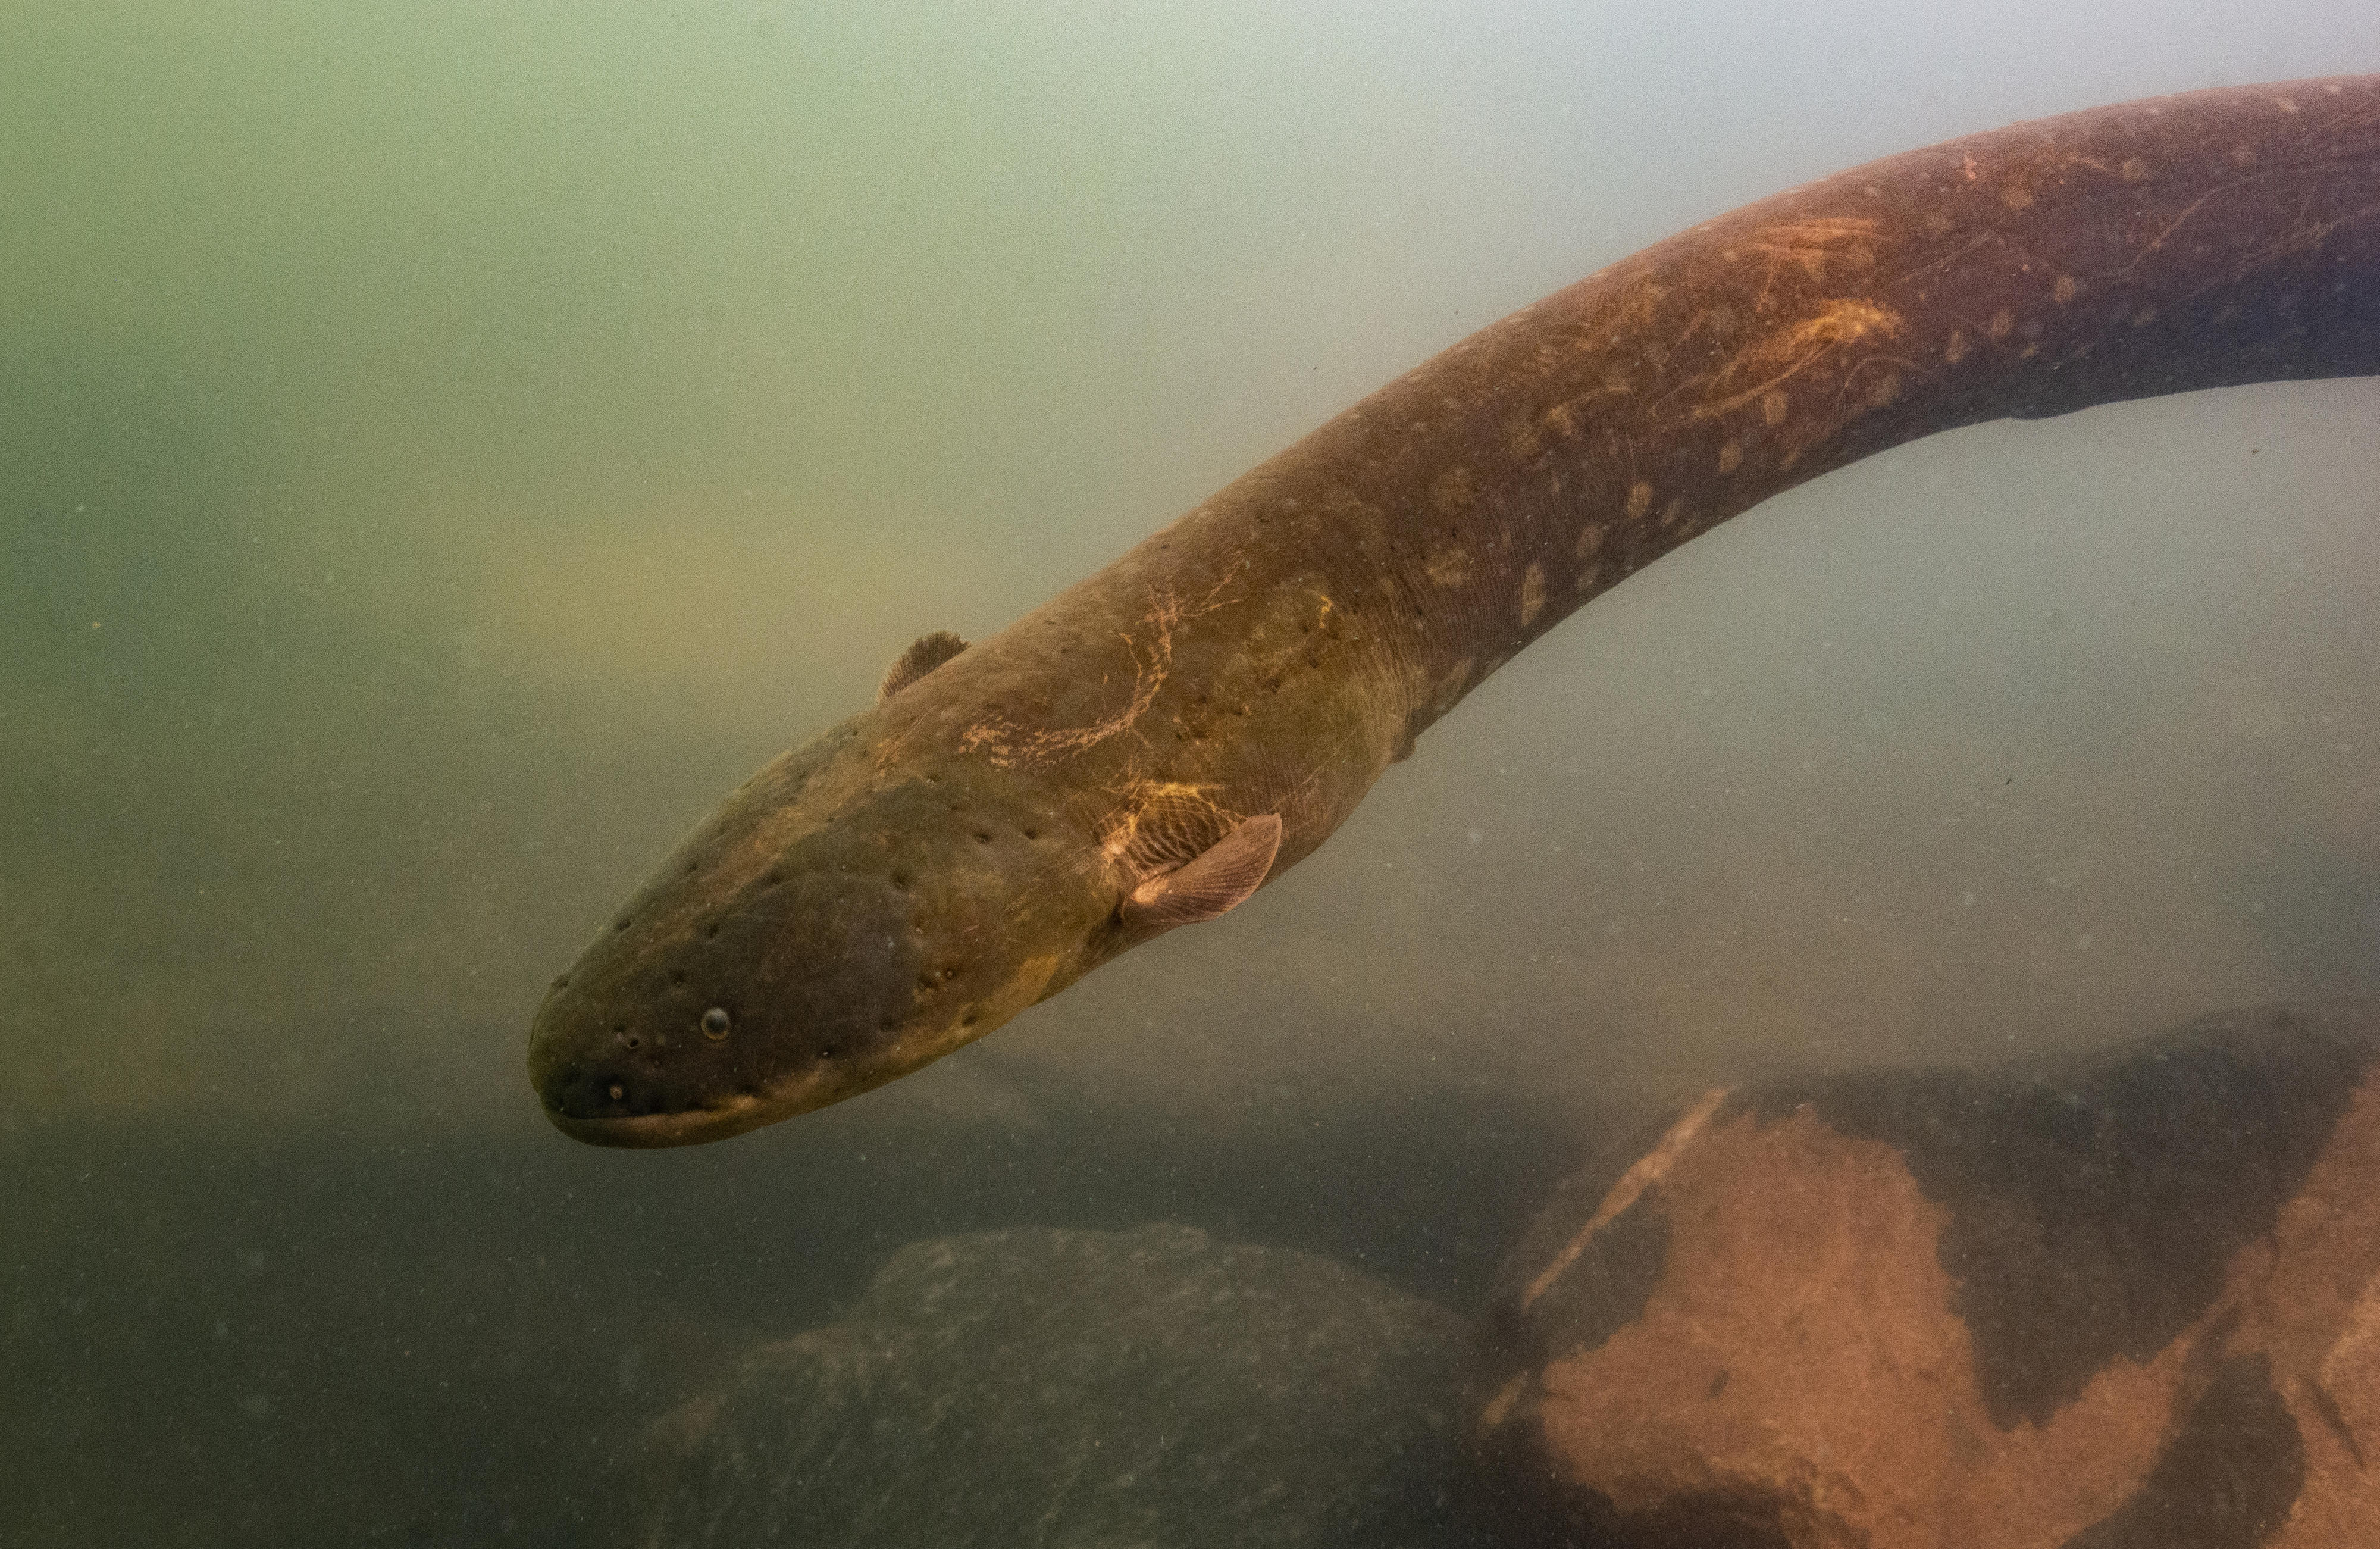 Electrophorus voltai (shown above), one of the two newly discovered electric eel species, primarily lives further south than Electrophorus electricus on the Brazilian Shield, another highland region. Credit: L. Sousa